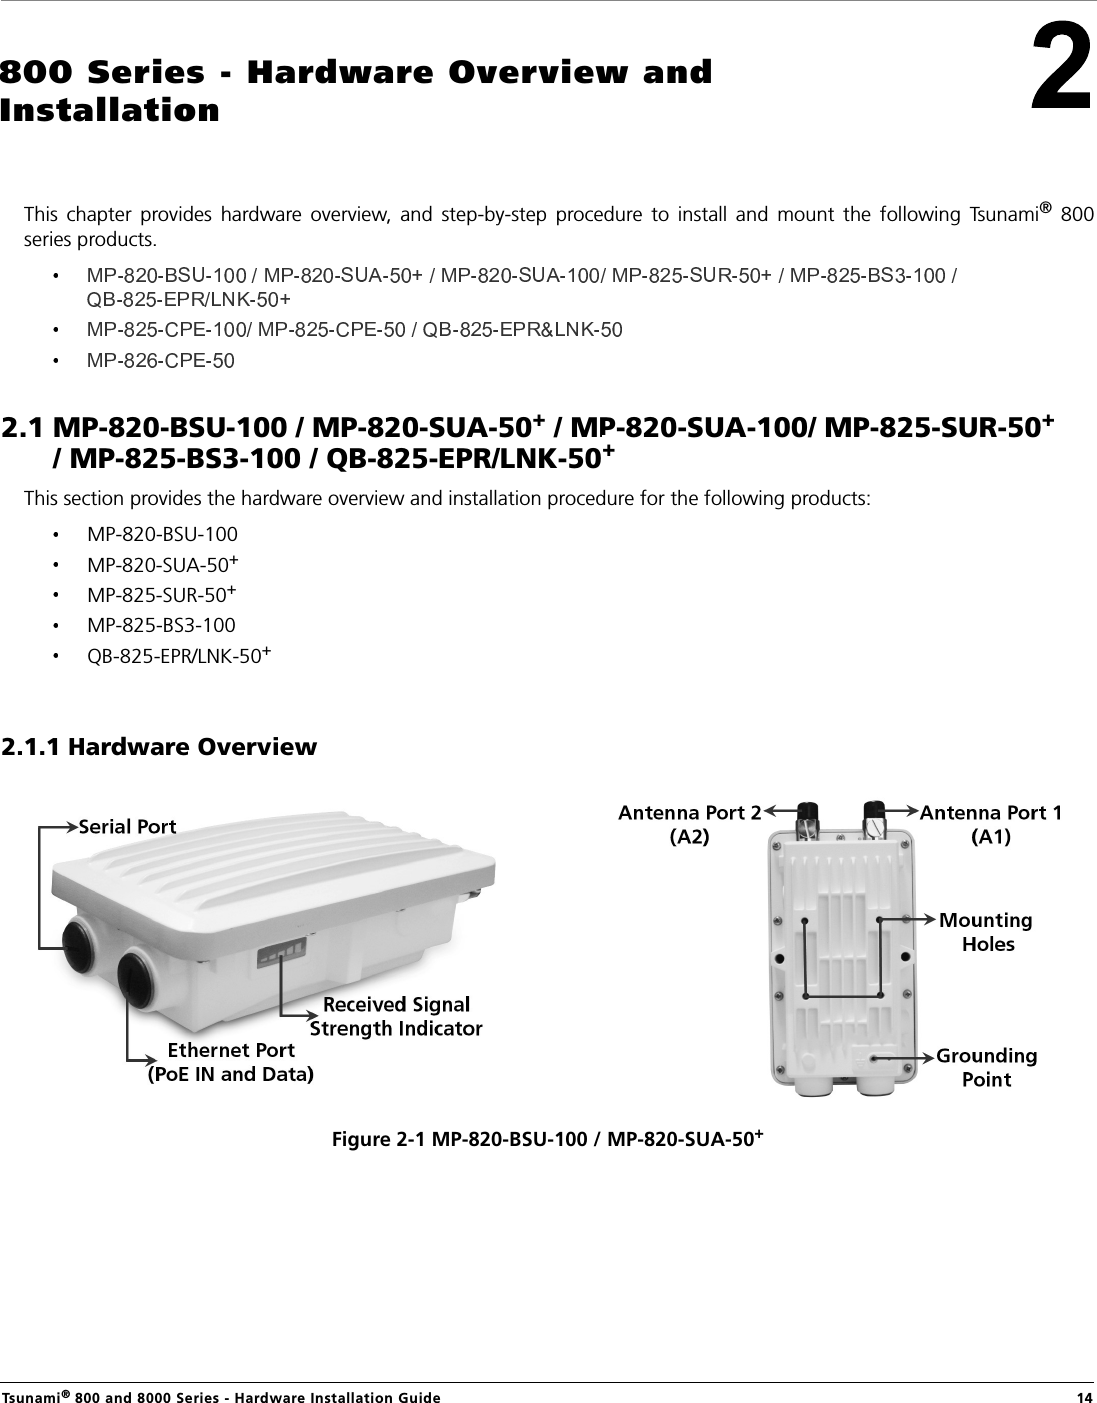 Tsunami® 800 and 8000 Series - Hardware Installation Guide  14800 Series - Hardware Overview and InstallationThis  chapter  provides  hardware  overview,  and  step-by-step  procedure  to  install  and  mount  the  following  Tsunami®  800series products. 2.1 MP-820-BSU-100 / MP-820-SUA-50+ / MP-820-SUA-100/ MP-825-SUR-50+      / MP-825-BS3-100 / QB-825-EPR/LNK-50+This section provides the hardware overview and installation procedure for the following products: MP-820-BSU-100MP-820-SUA-50+MP-825-SUR-50+MP-825-BS3-100QB-825-EPR/LNK-50+2.1.1 Hardware OverviewFigure 2-1 MP-820-BSU-100 / MP-820-SUA-50+